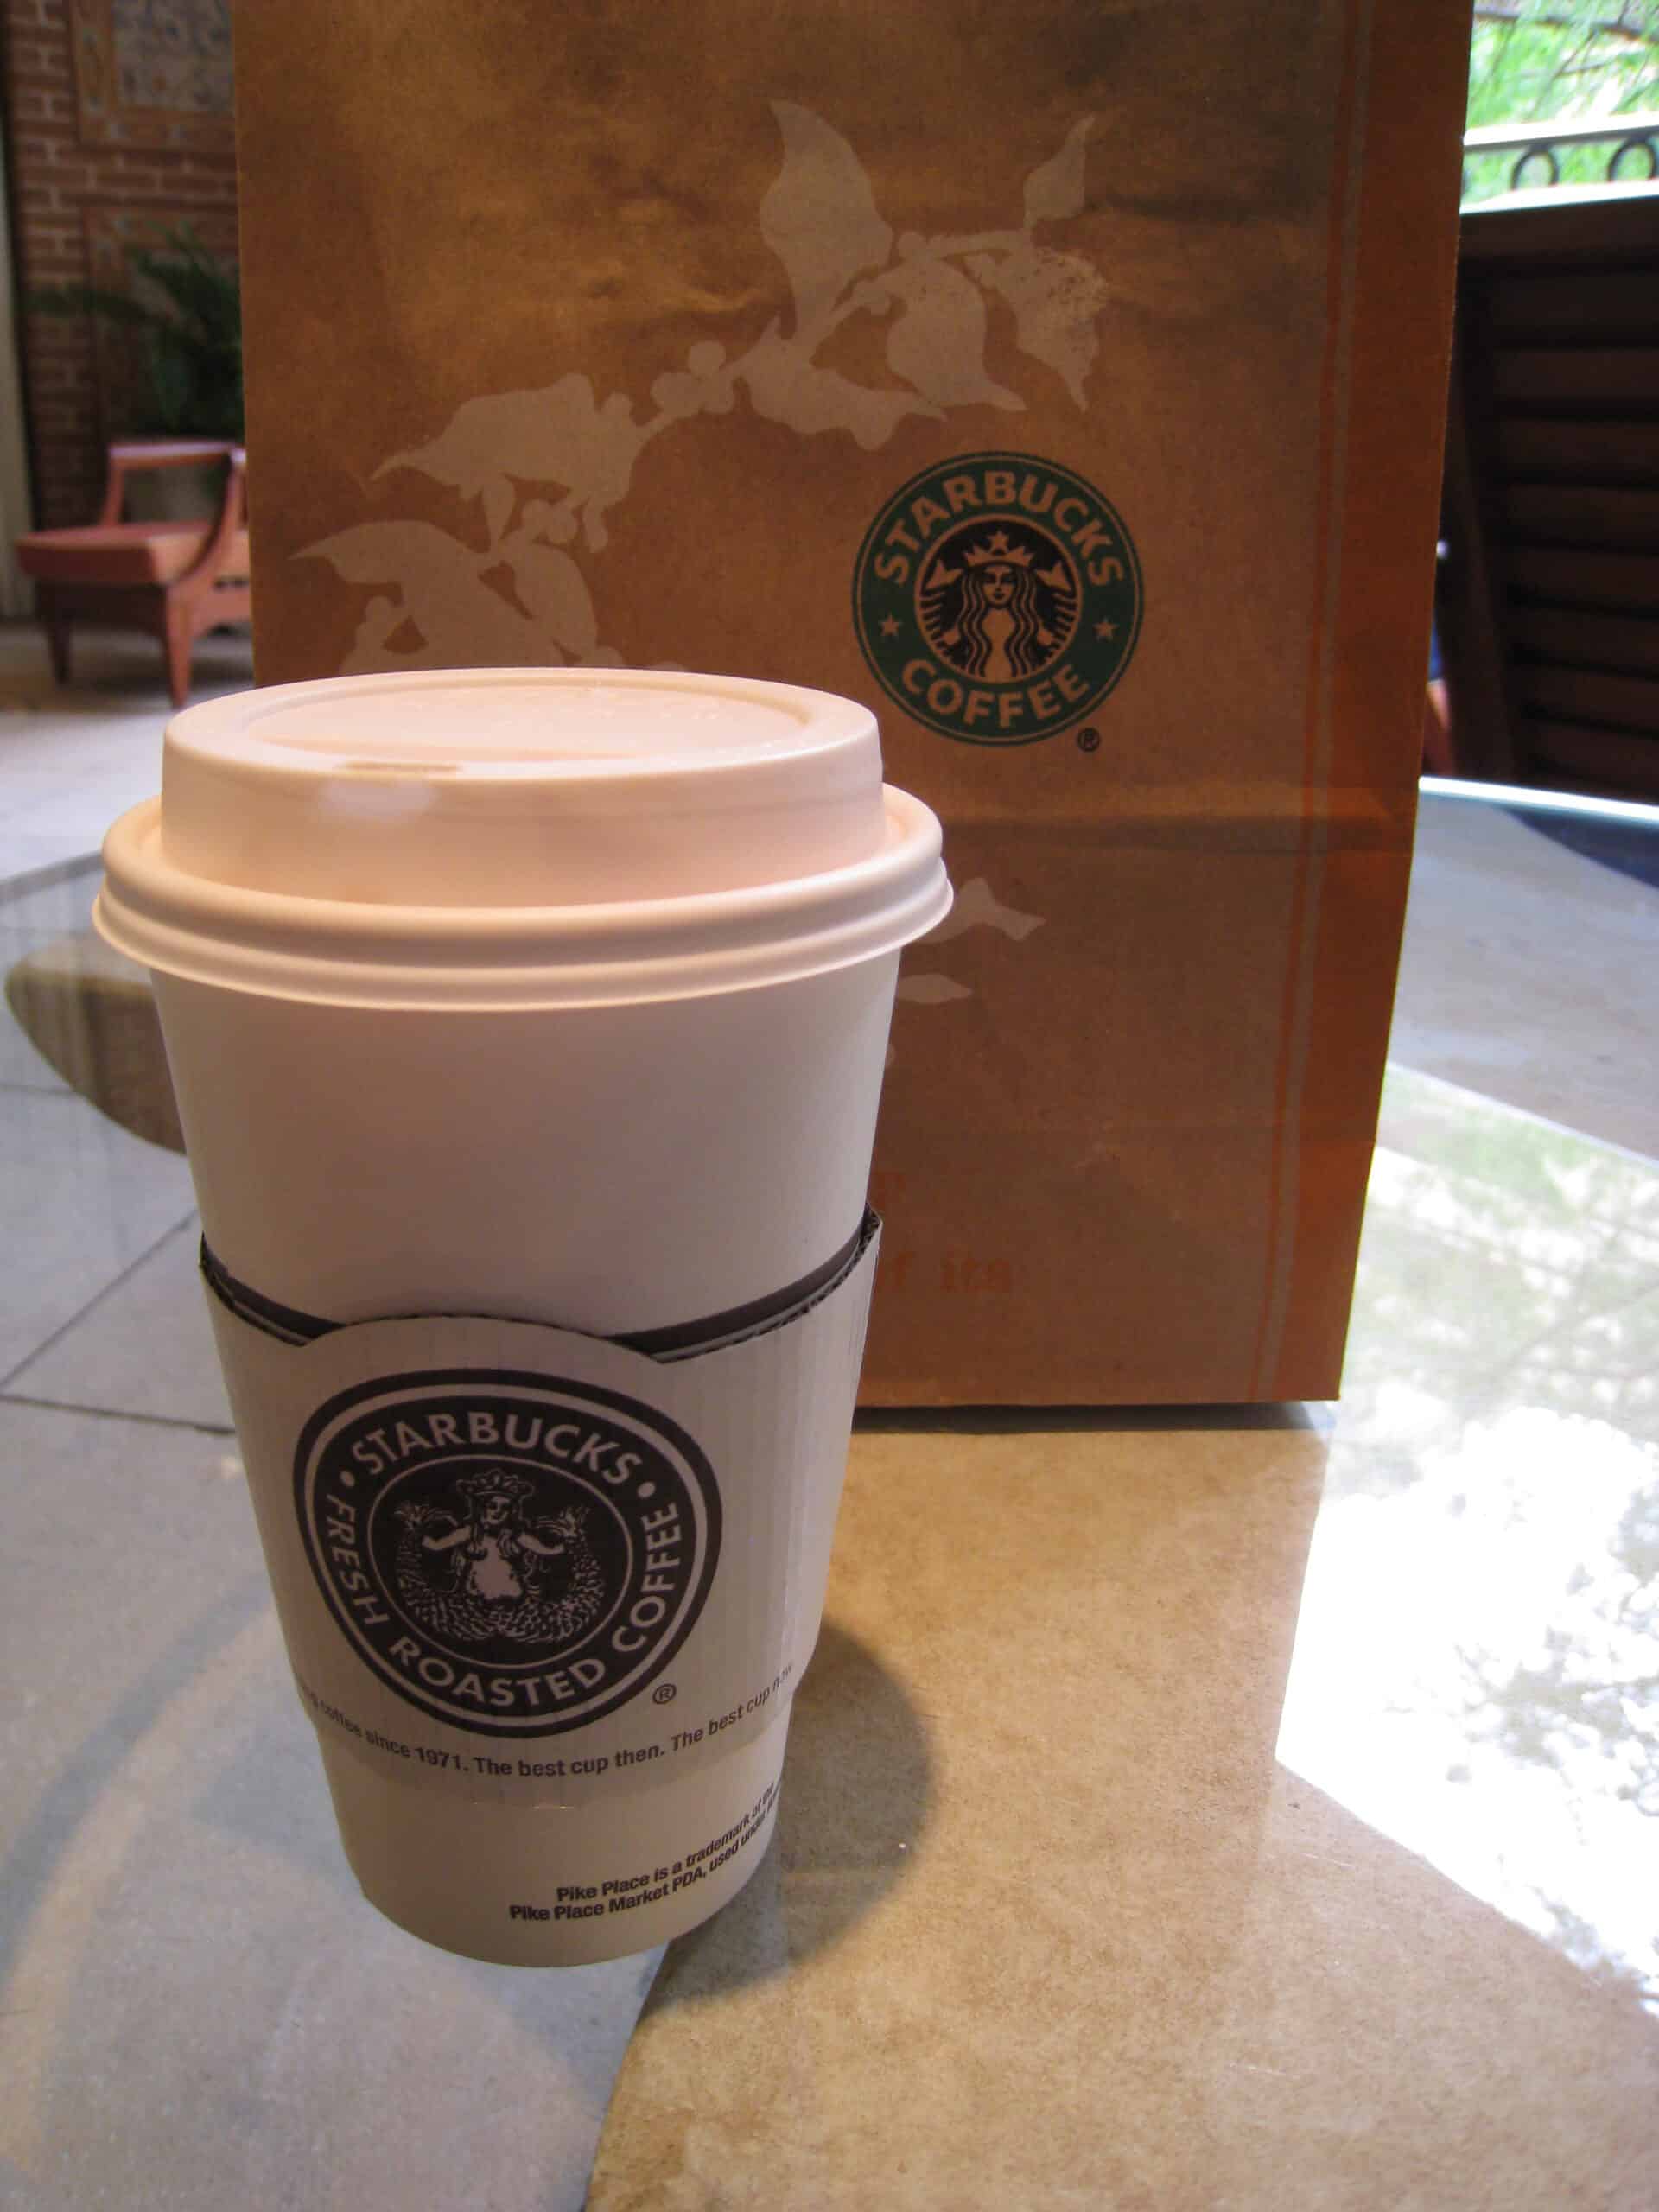 Starbucks cup and bakery bag